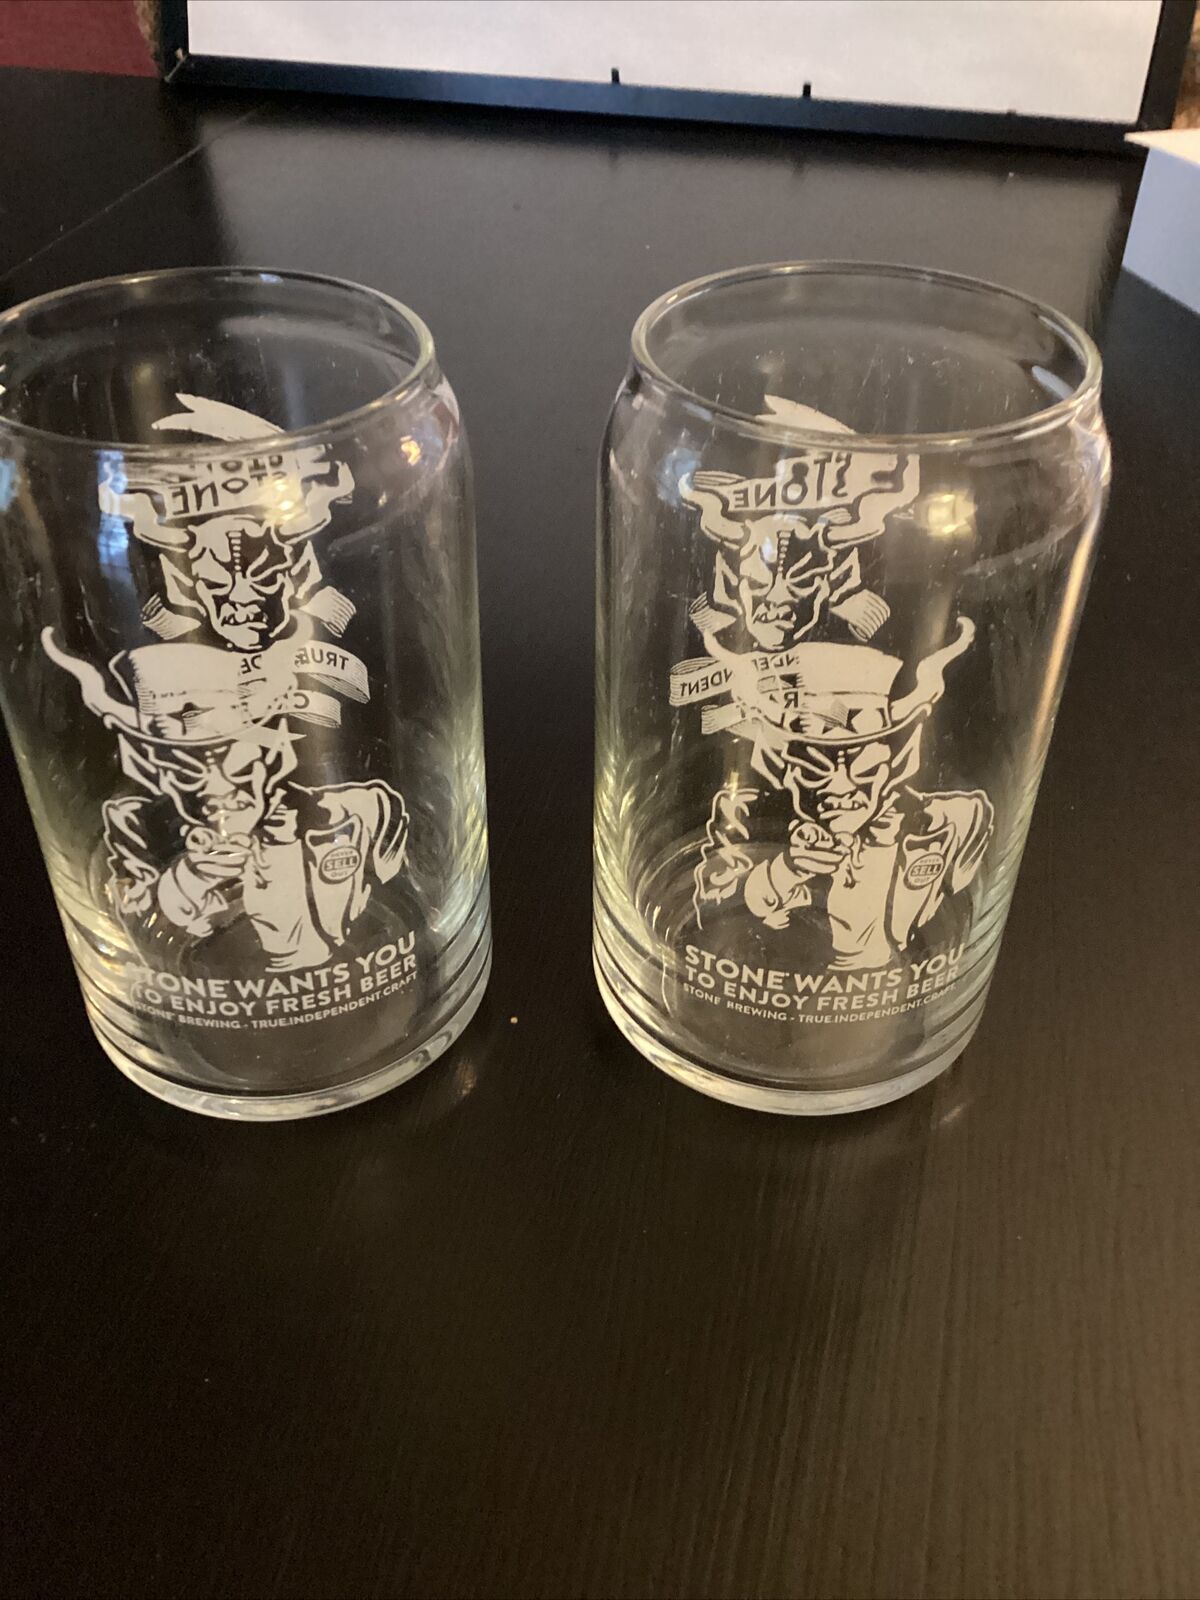 Stone Brewing Company Set Of 2 Pint Glasses -Stone Wants You To Enjoy Fresh Beer